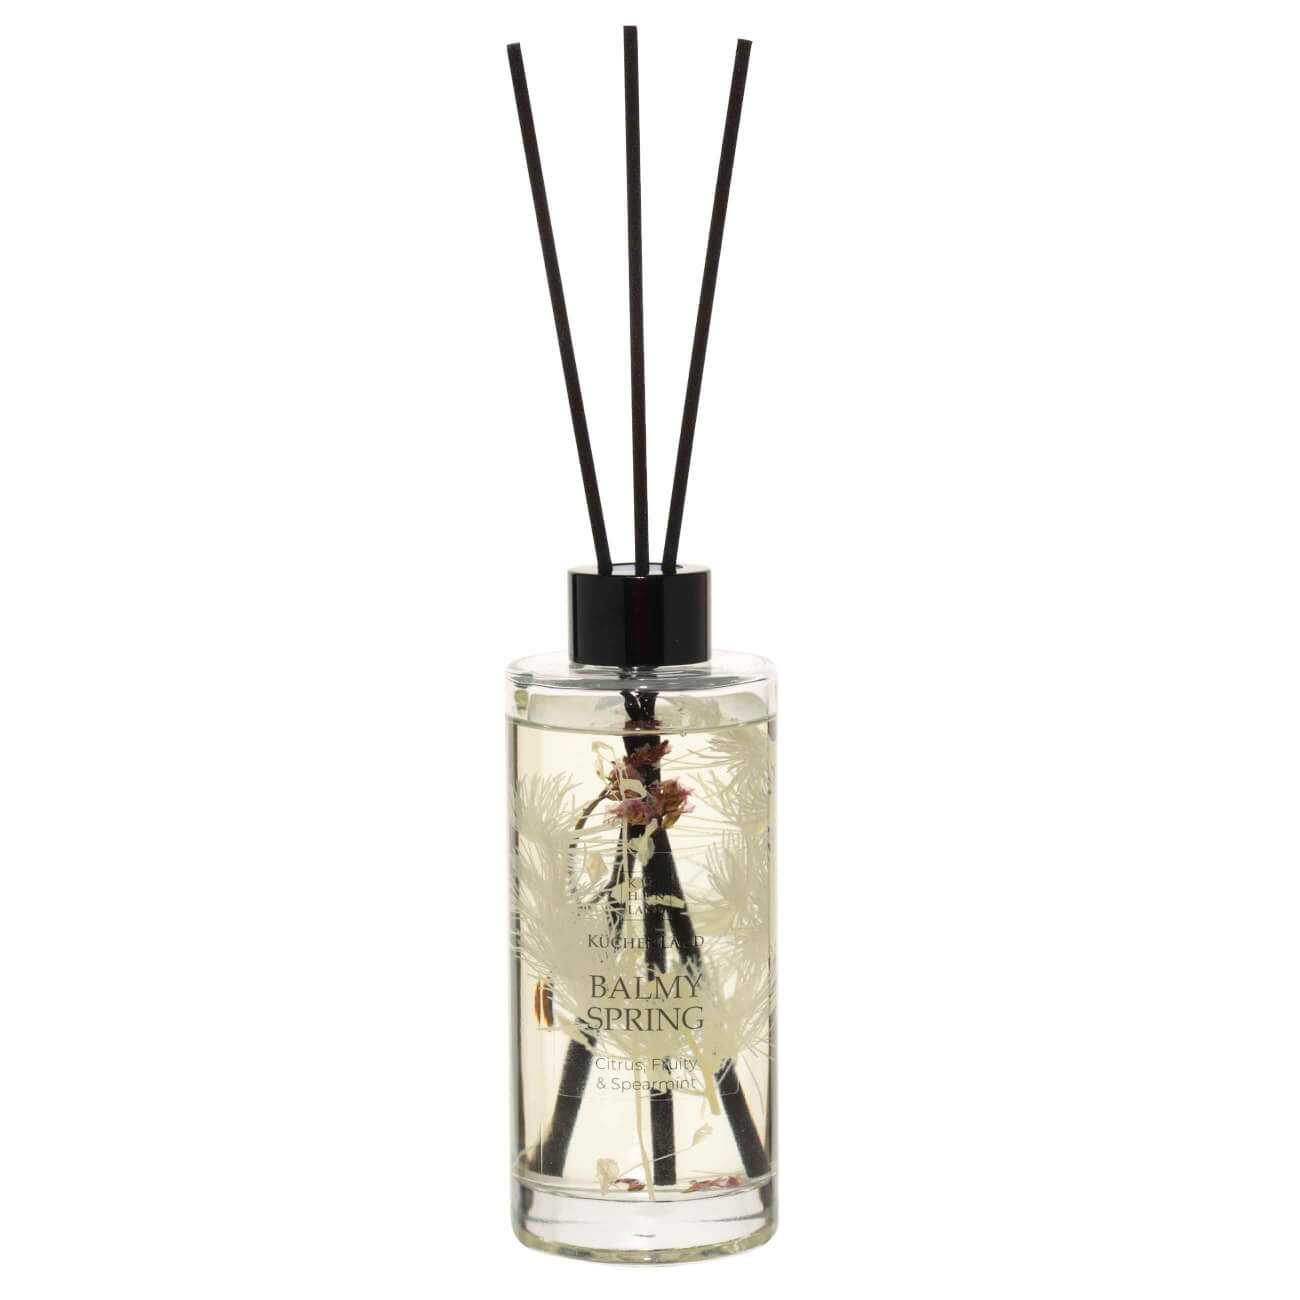 Perfume diffuser, 180 ml, with dried flowers, Citrus, Fruity&Spearmint, Balmy spring изображение № 1